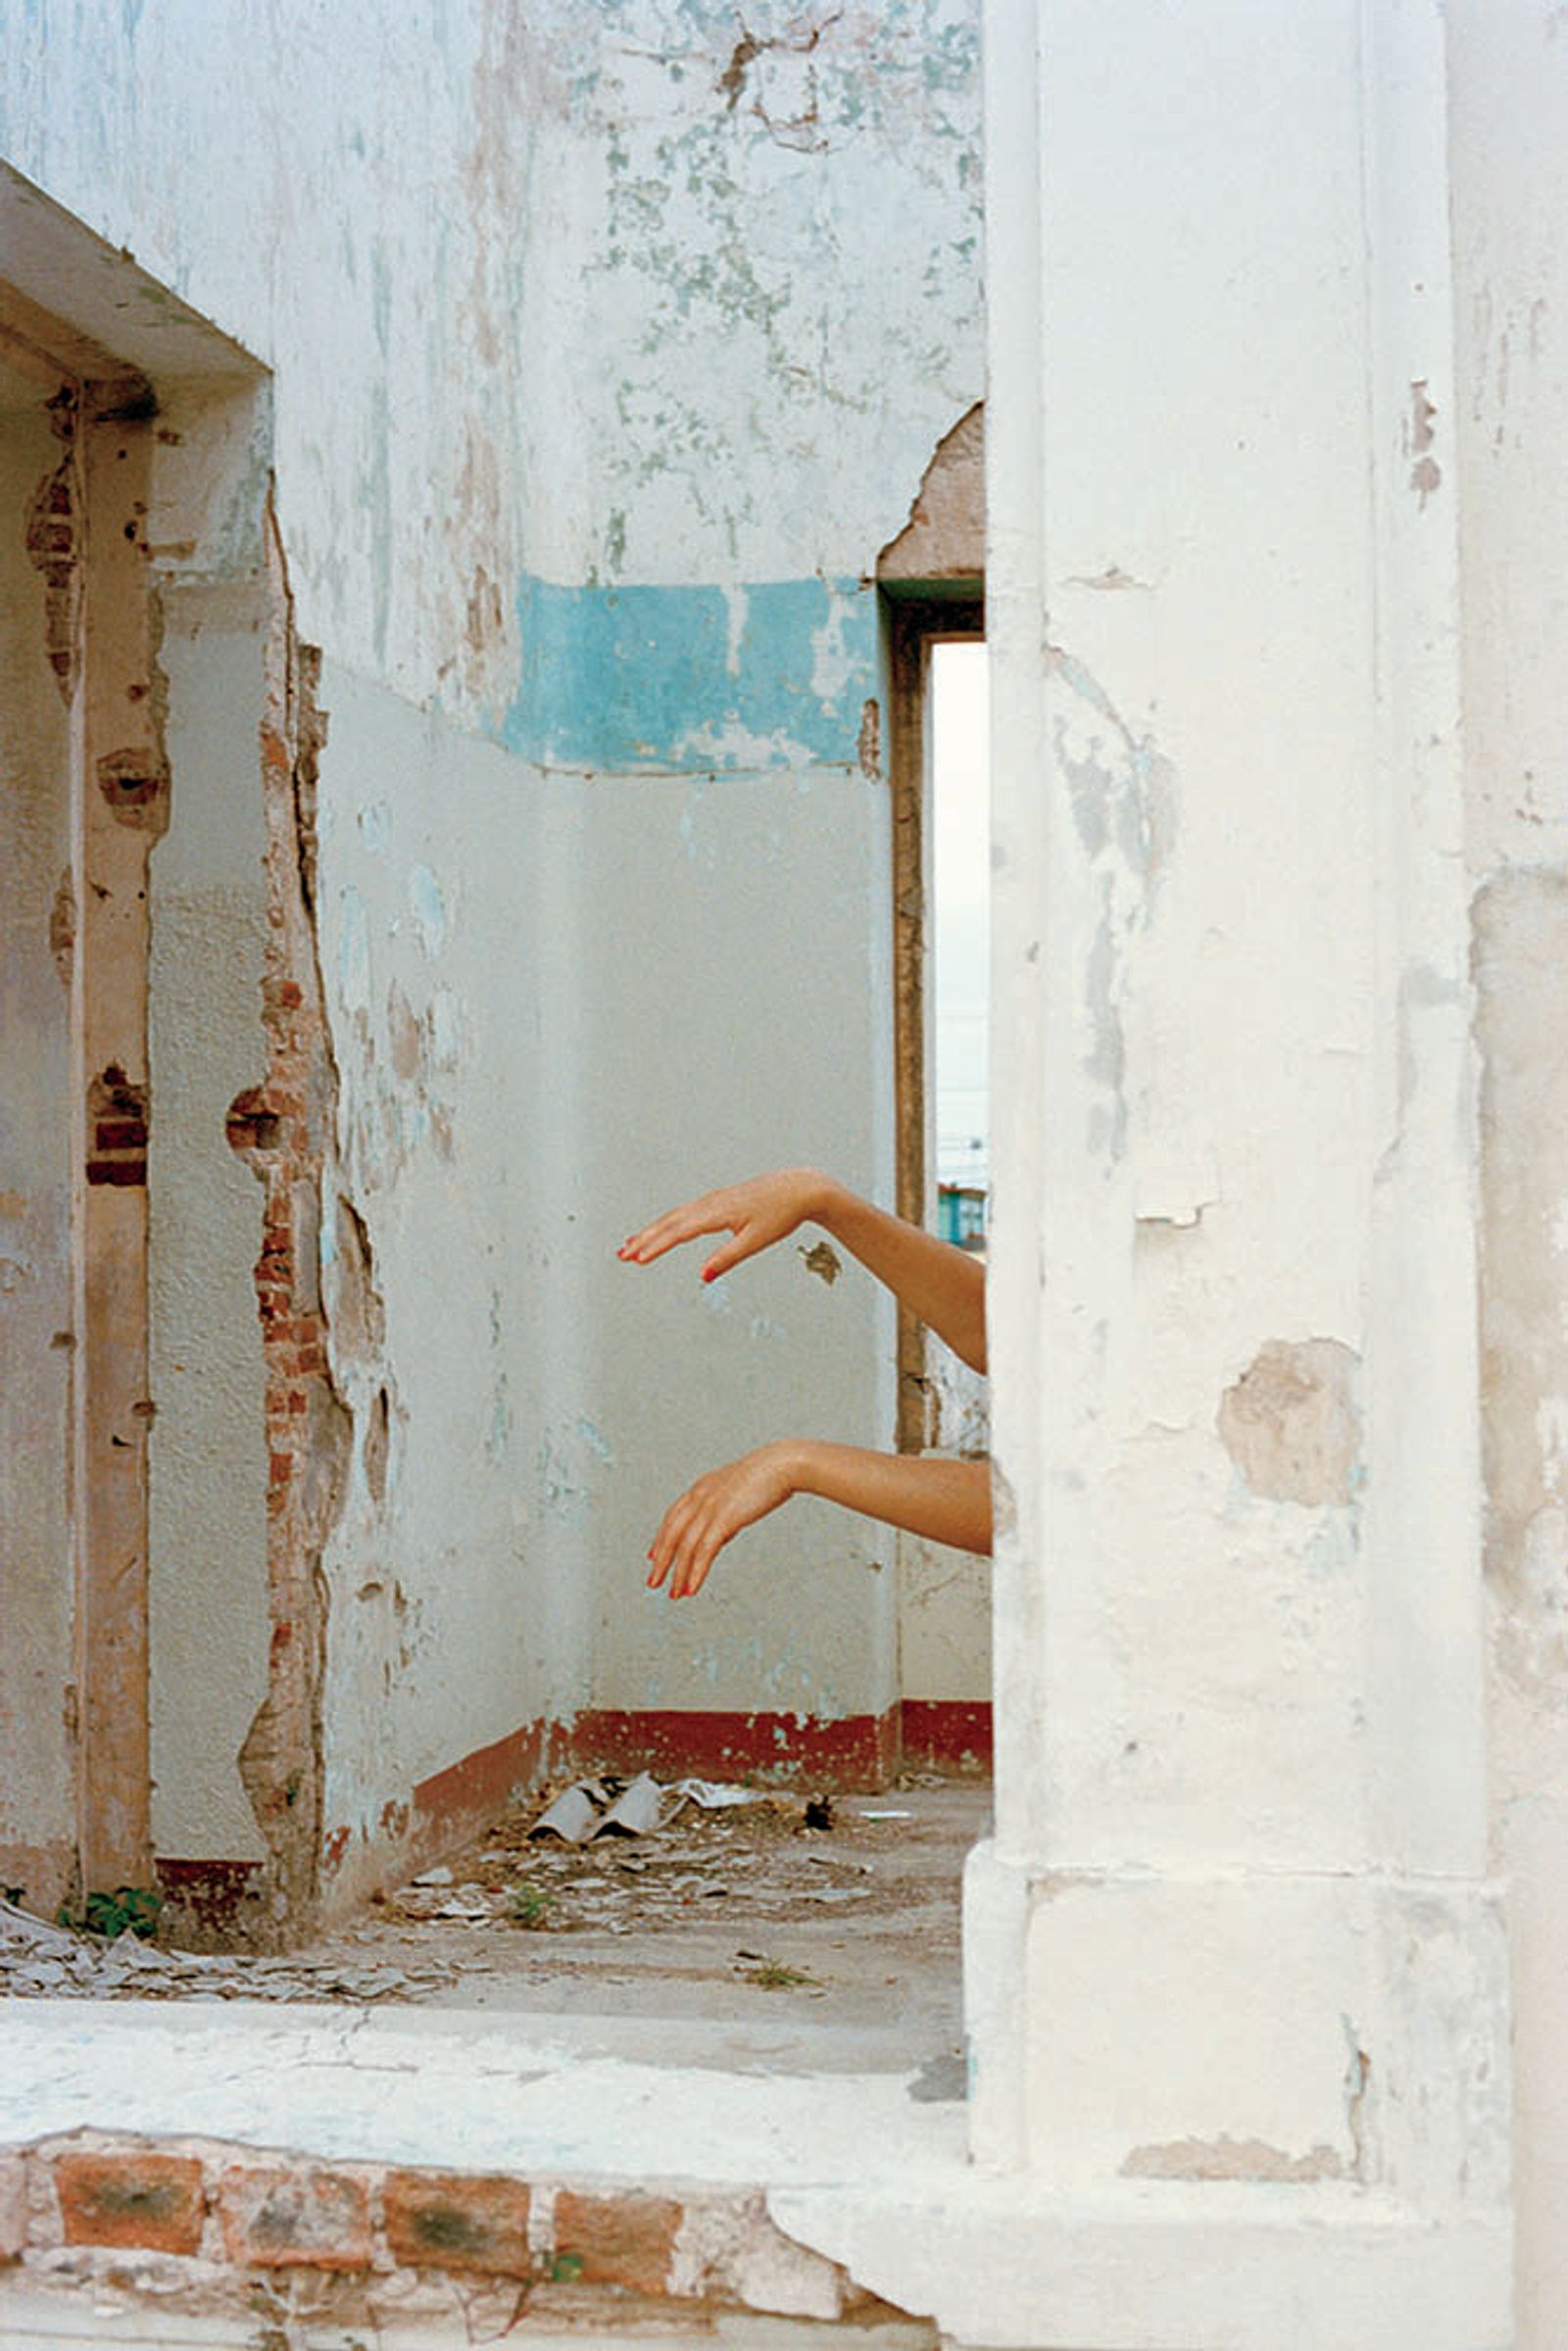 © Veronica Puche - Image from the Such as my great uncle, eaten by a shark photography project